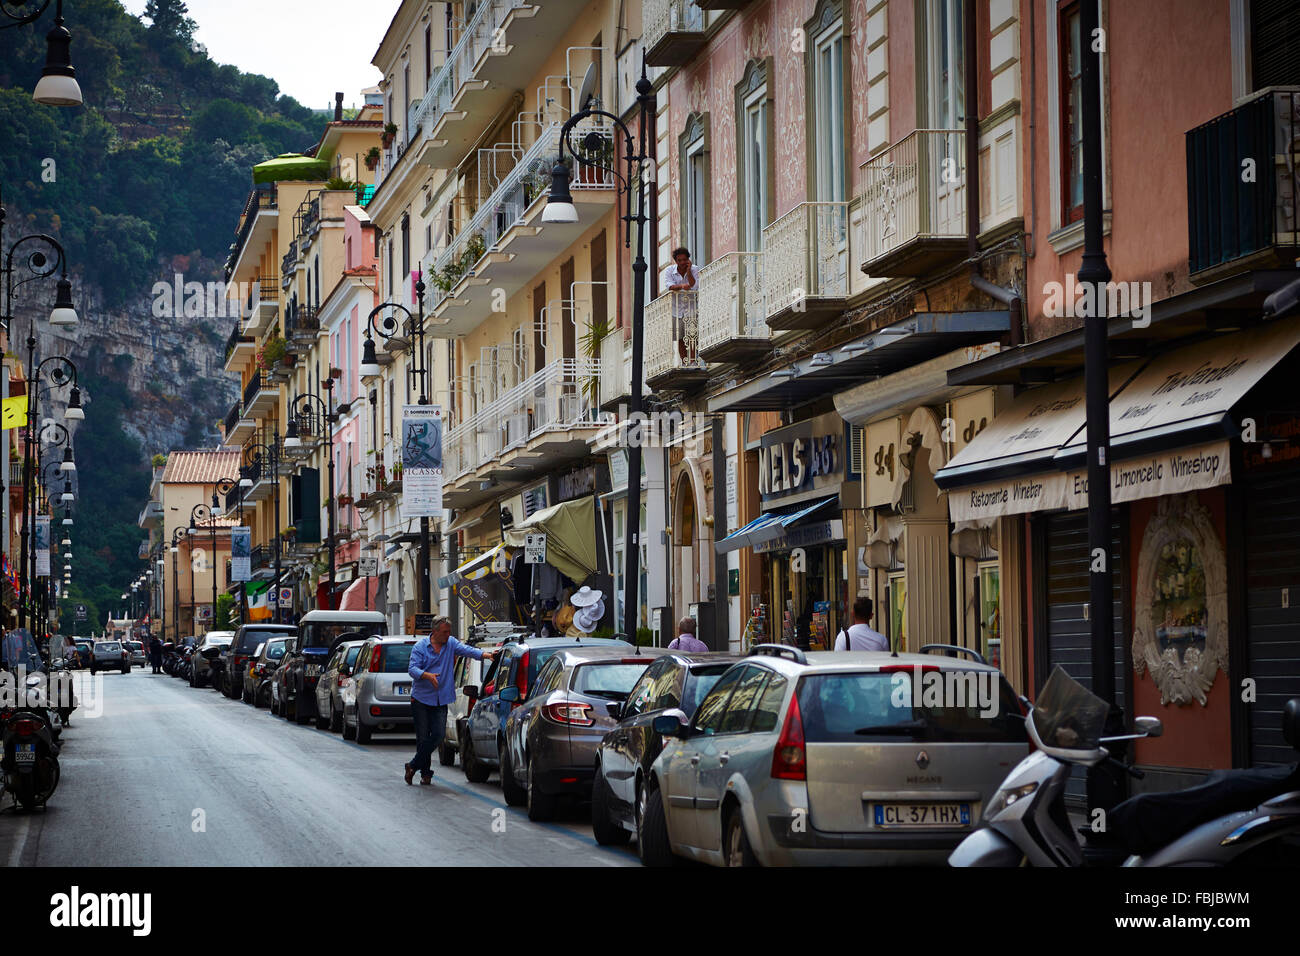 Street in Sorrento, row of houses, parking cars, man leaning against car, Amalfi Coast, Italy Stock Photo